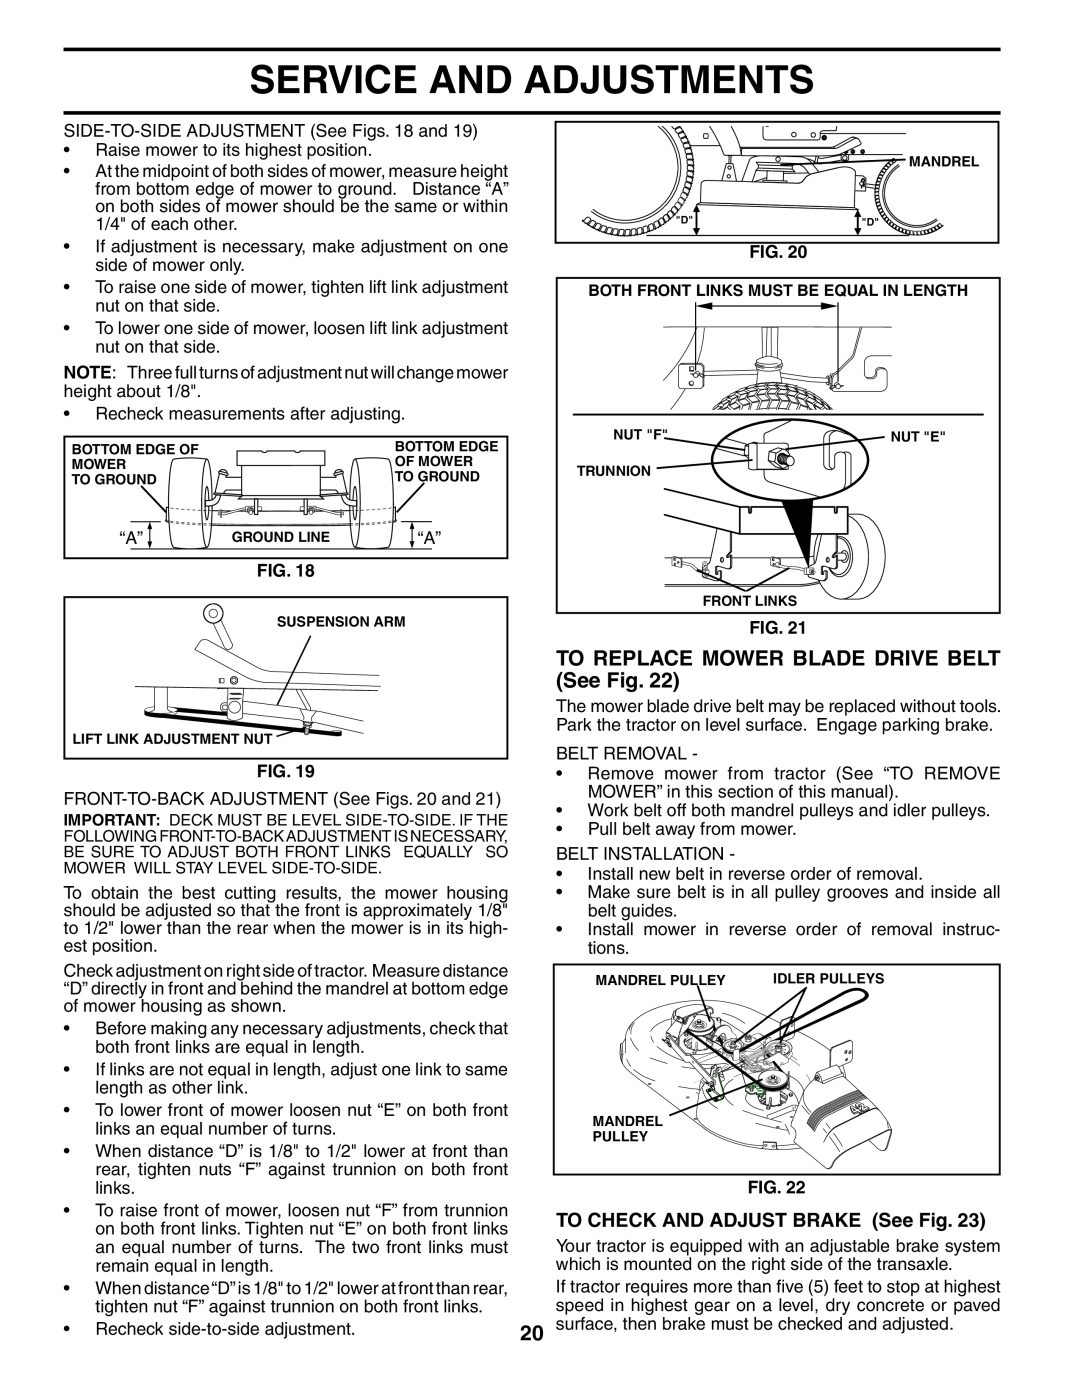 Husqvarna YTH1842 TO REPLACE MOWER BLADE DRIVE BELT See Fig, TO CHECK AND ADJUST BRAKE See Fig, Service And Adjustments 